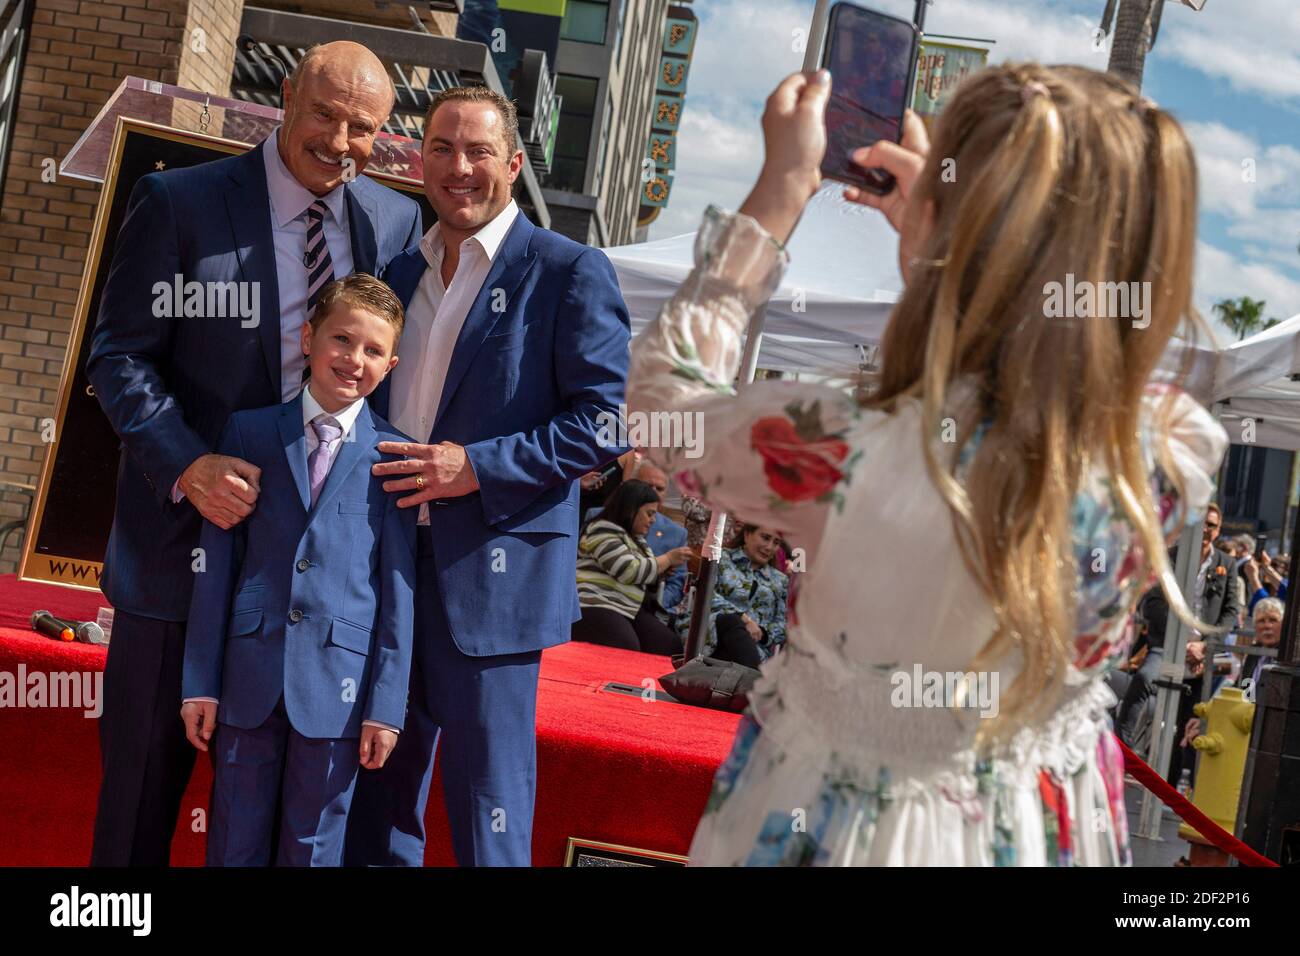 Dr Phil family attends the ceremony honoring Dr. Phill McGraw with a star on The Hollywood Walk Of Fame on February 21, 2020 in Los Angeles, CA, USA. Photo by Lionel Hahn/ABACAPRESS.COM Stock Photo